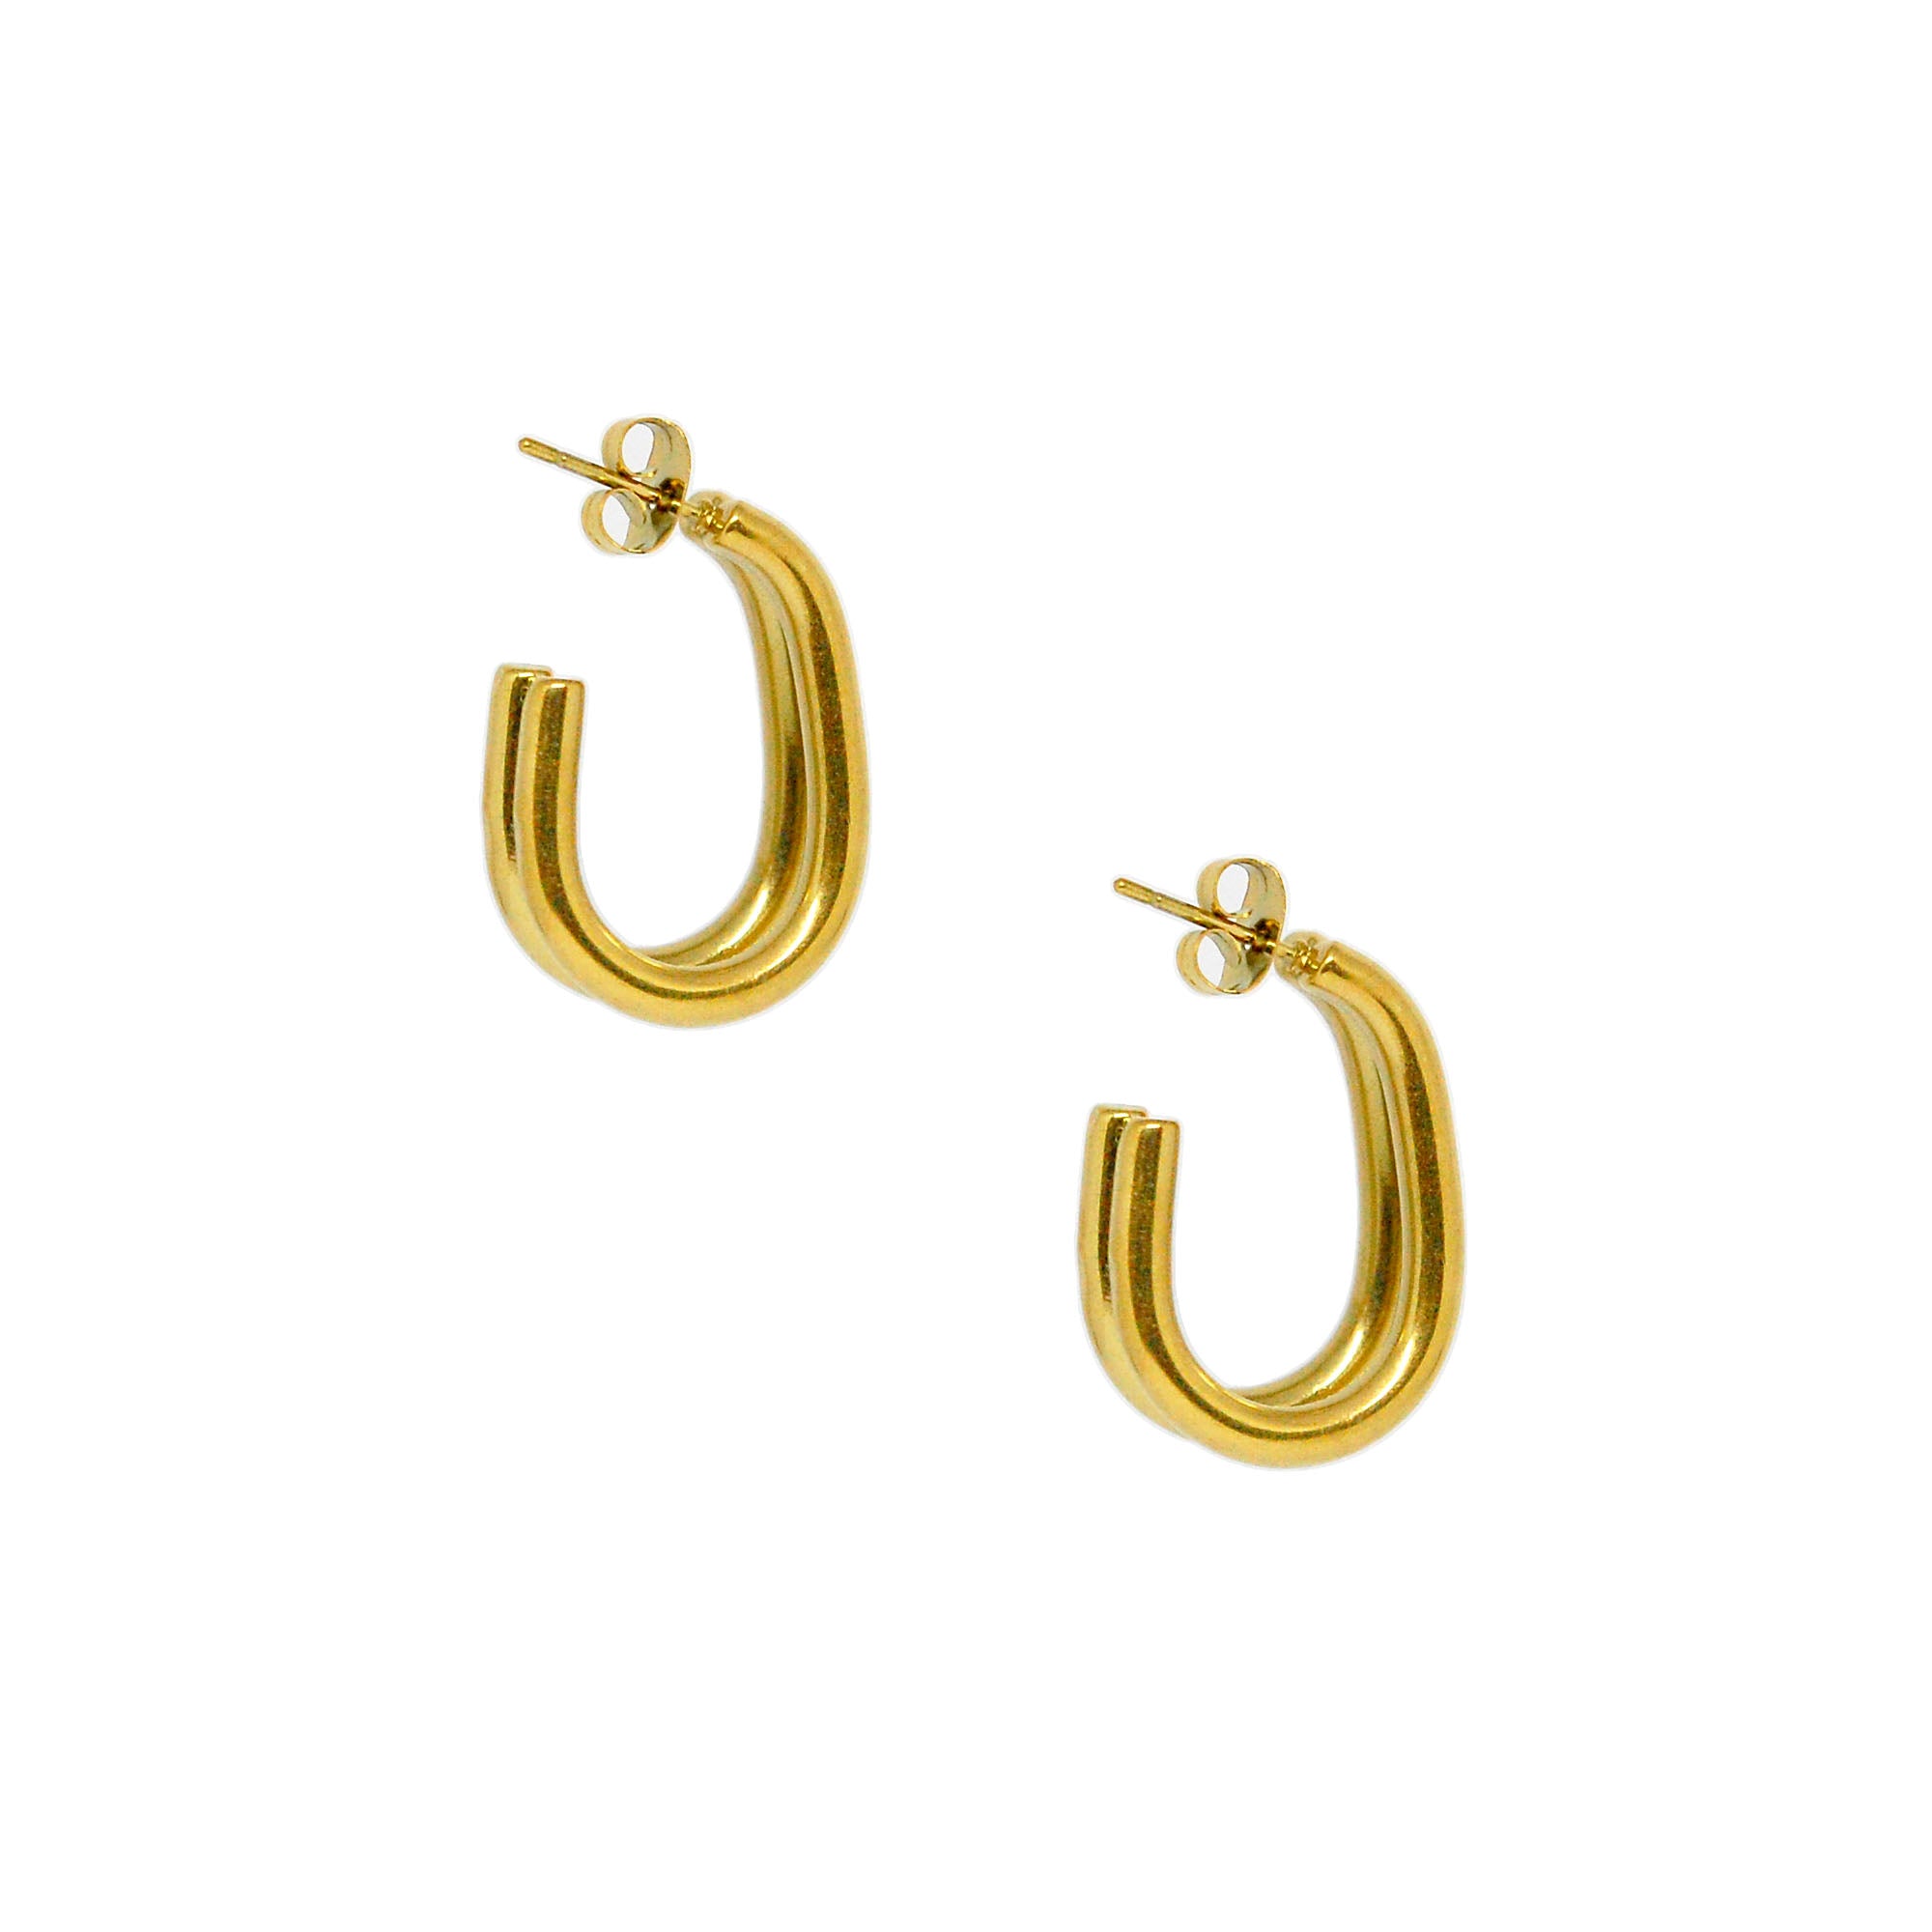 ESE 7704: Gold Plated Elongated 2-Lined Hook Earrings